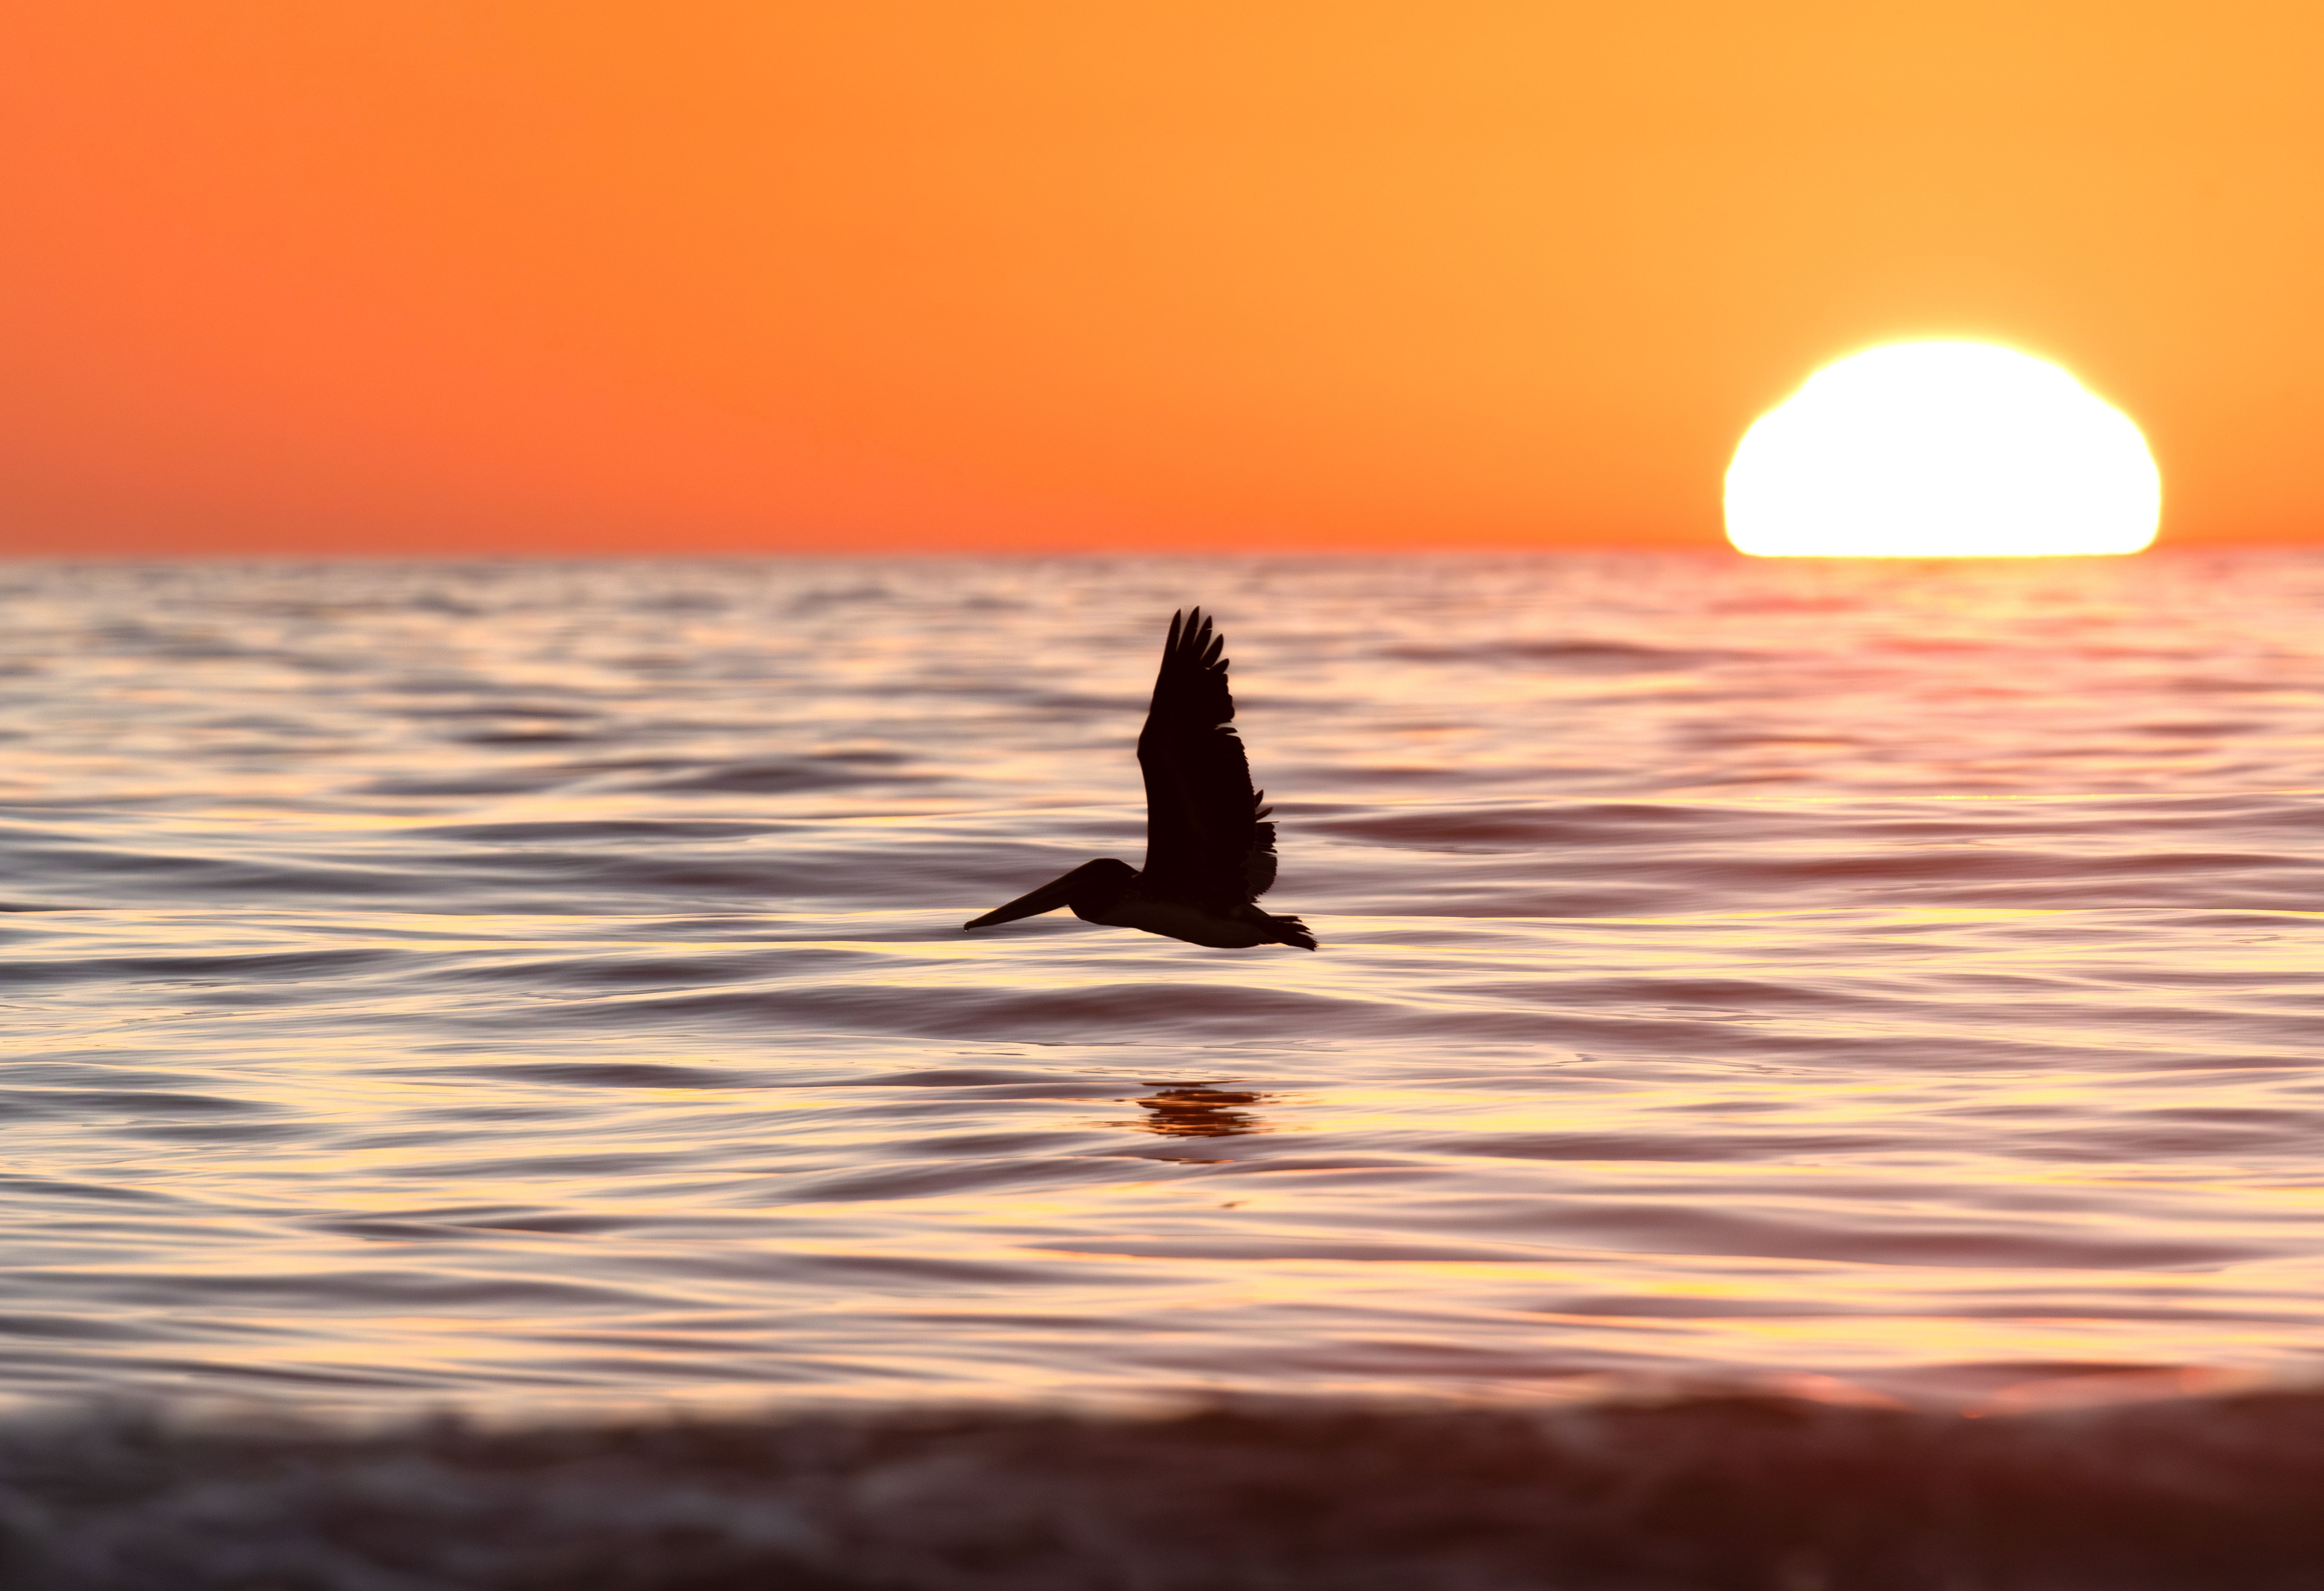 Photo of a brown pelican flying over the ocean, silhouetted by the setting sun